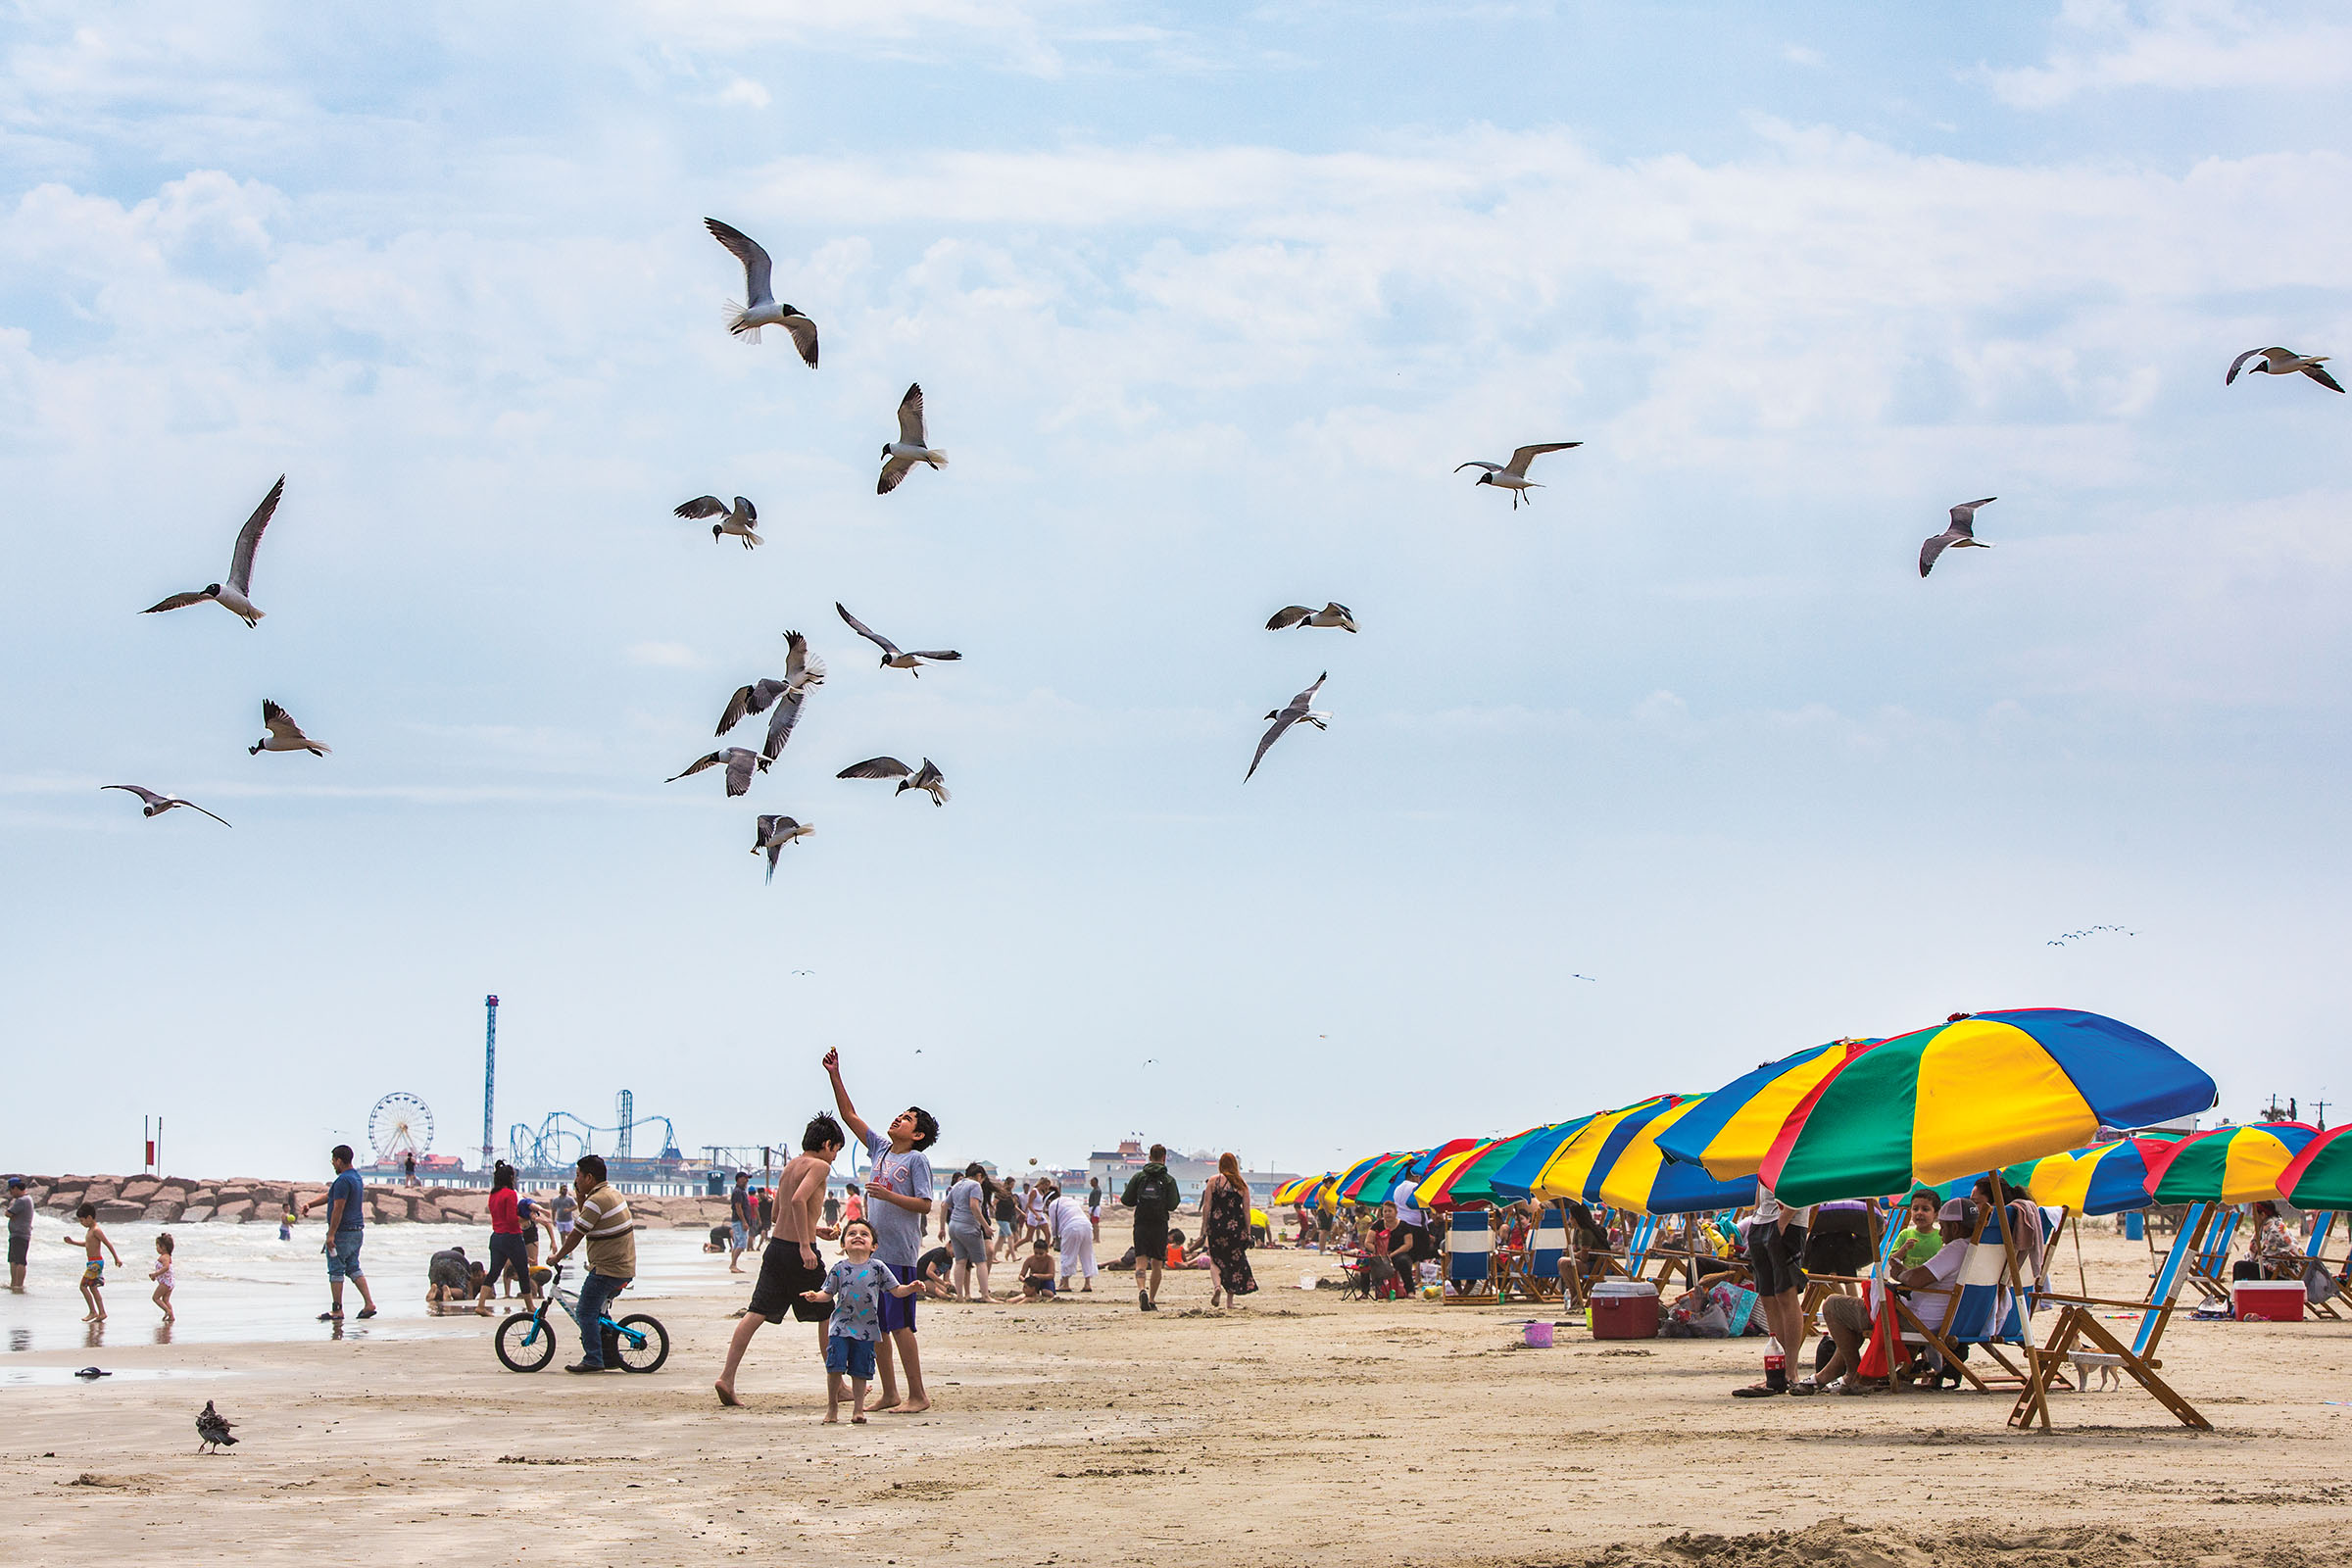 Blue sky with birds and a beach scene with colorful umbrellas and beachwalkers